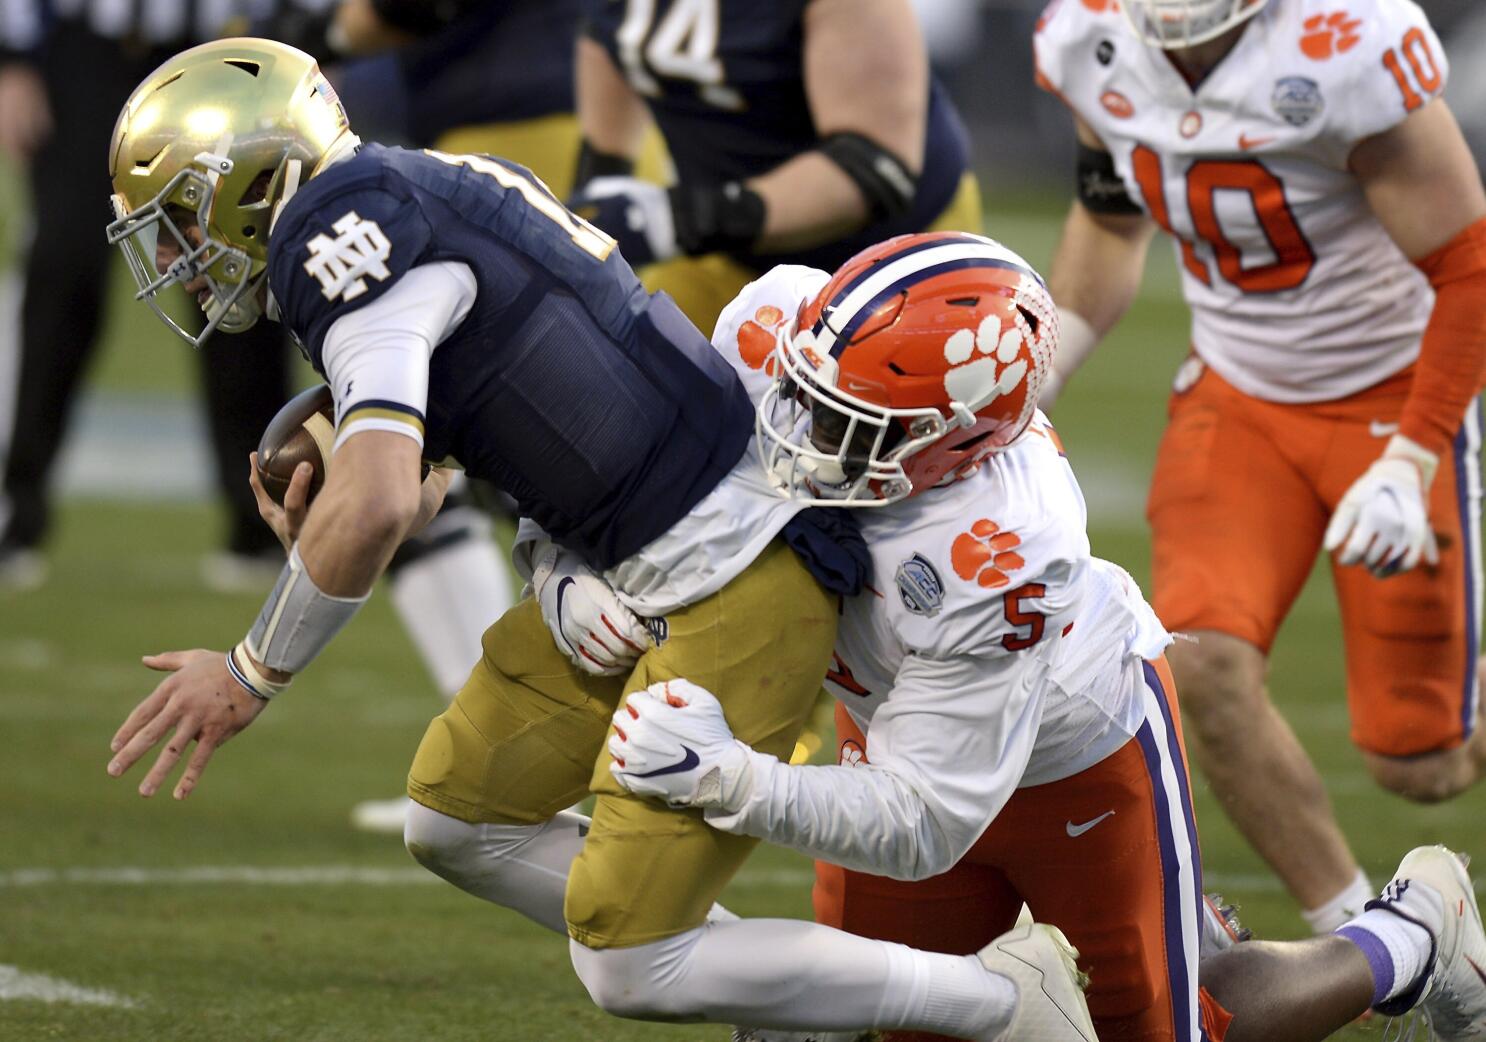 Can Irish compete with Alabama and Clemson? 'Notre Dame is better